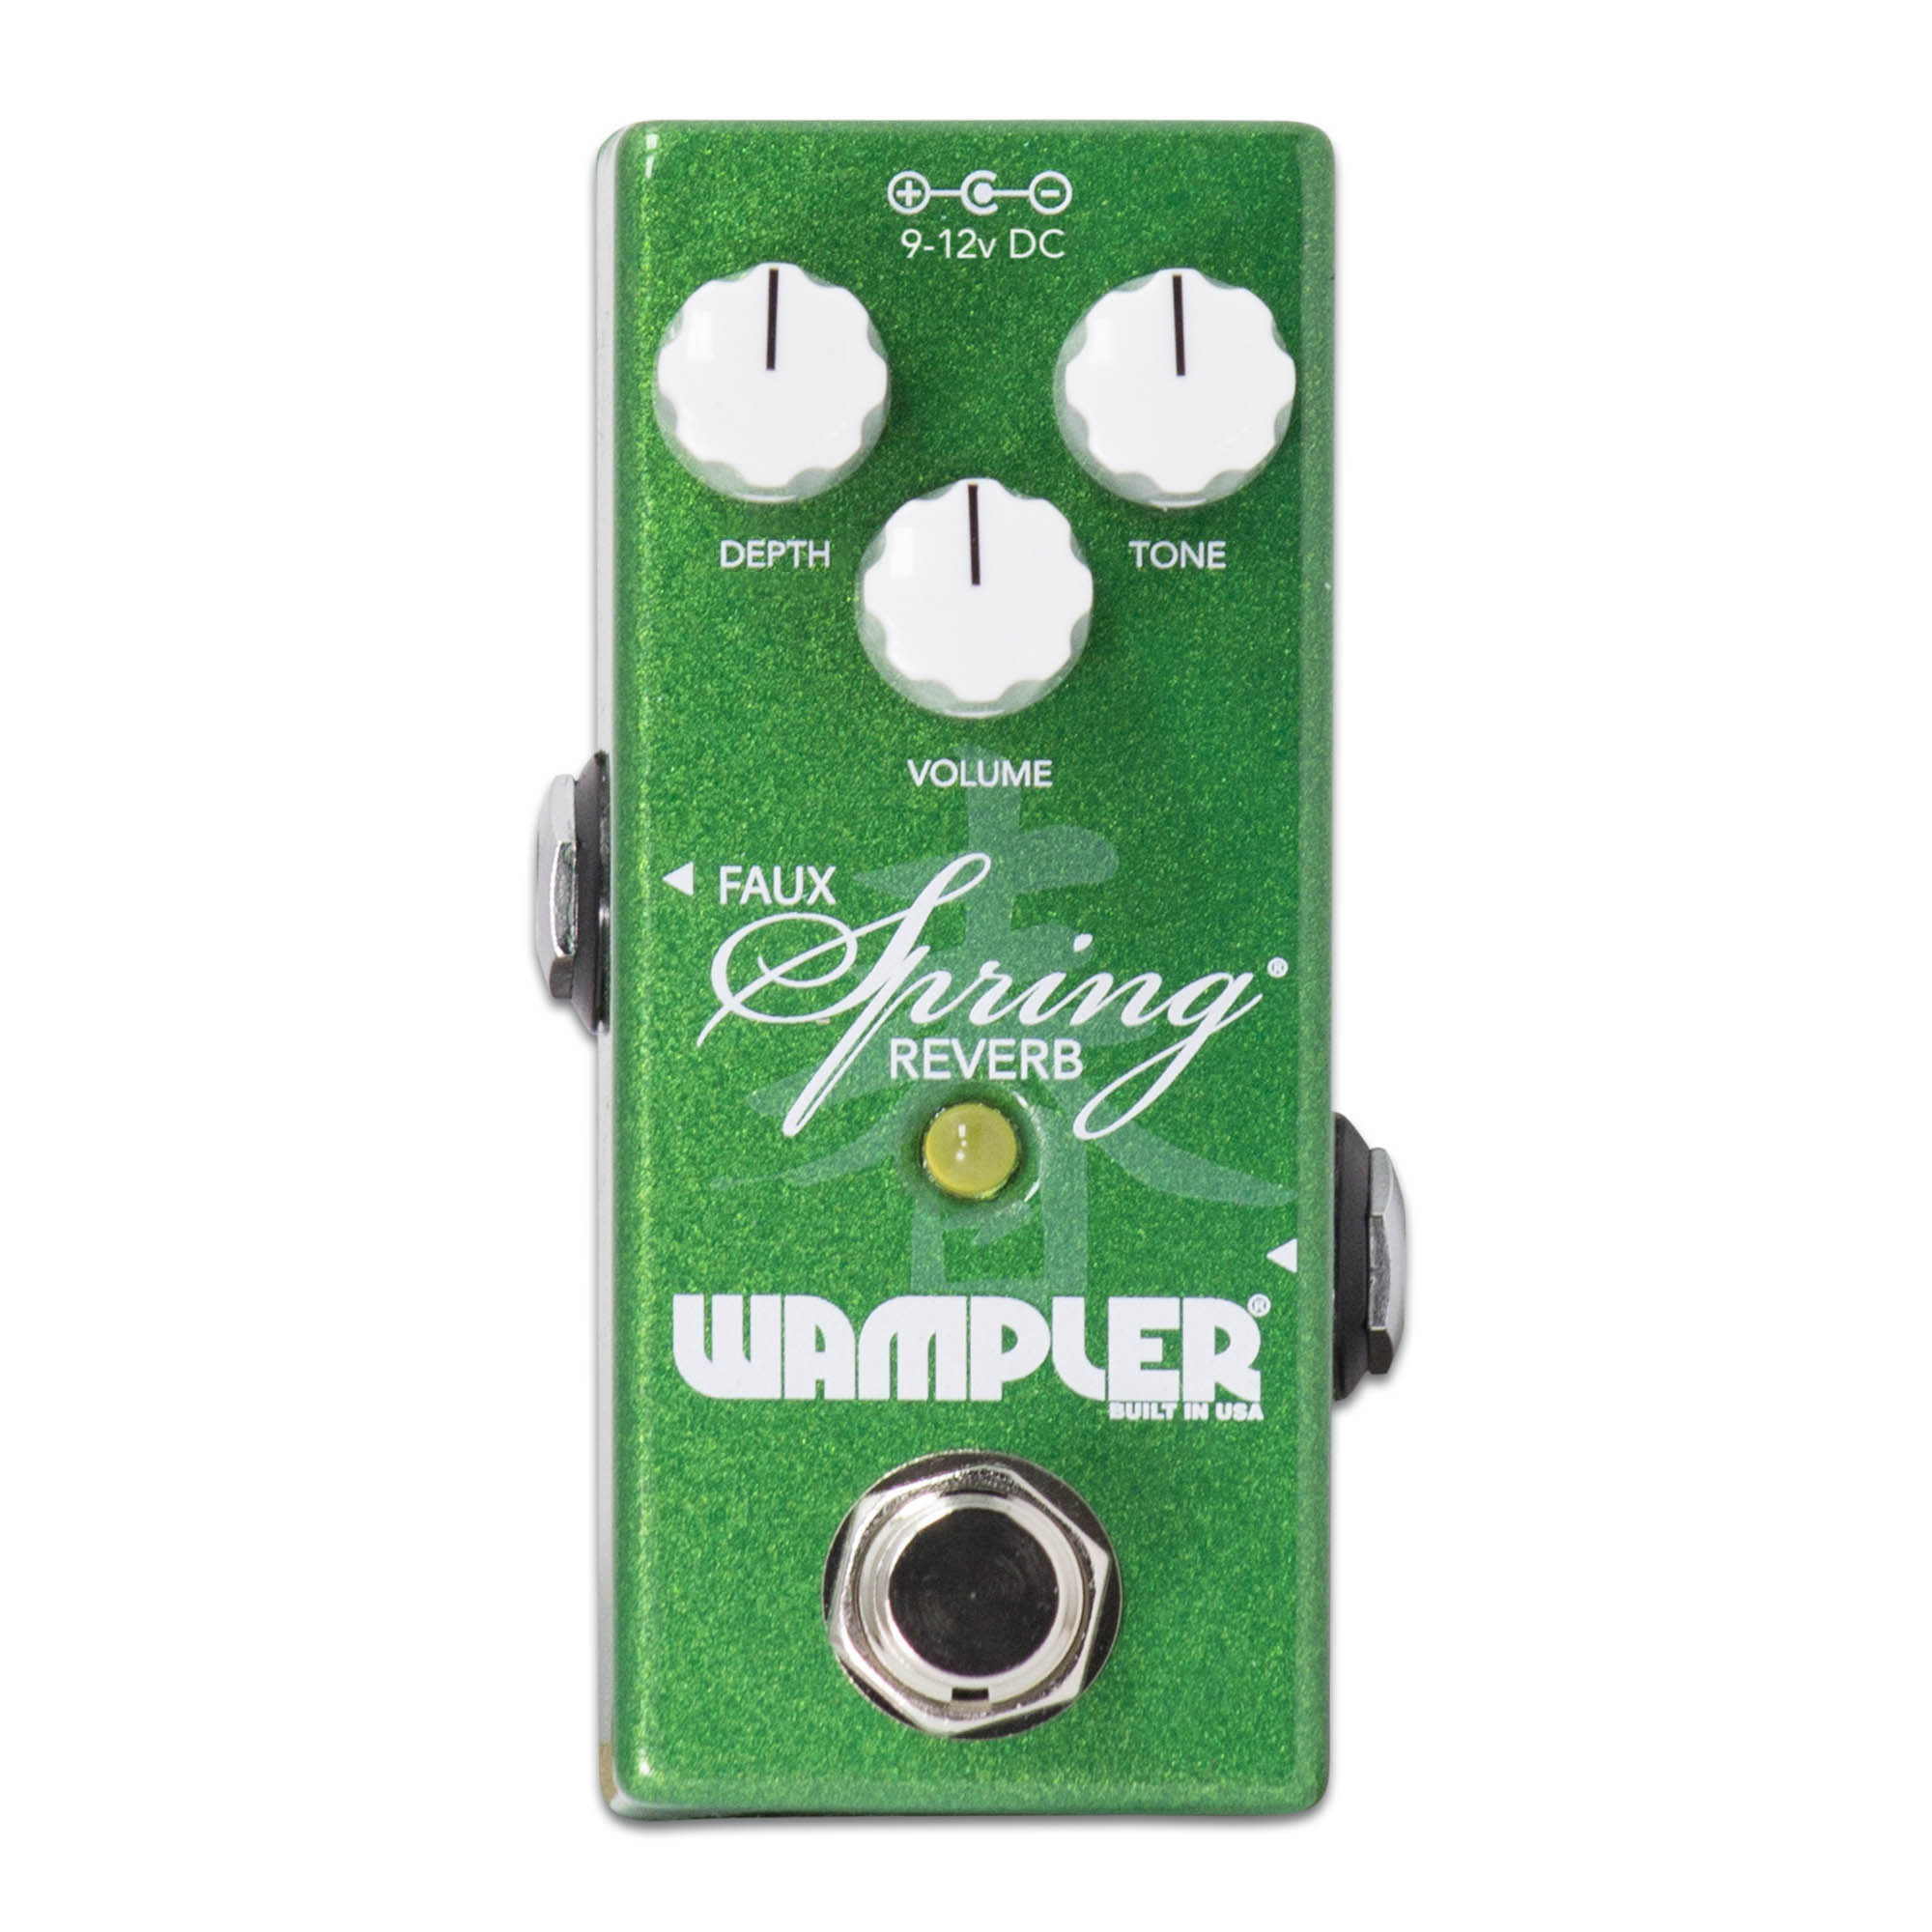 Wampler　Mini　Reverb　Spring　Faux　Pedals